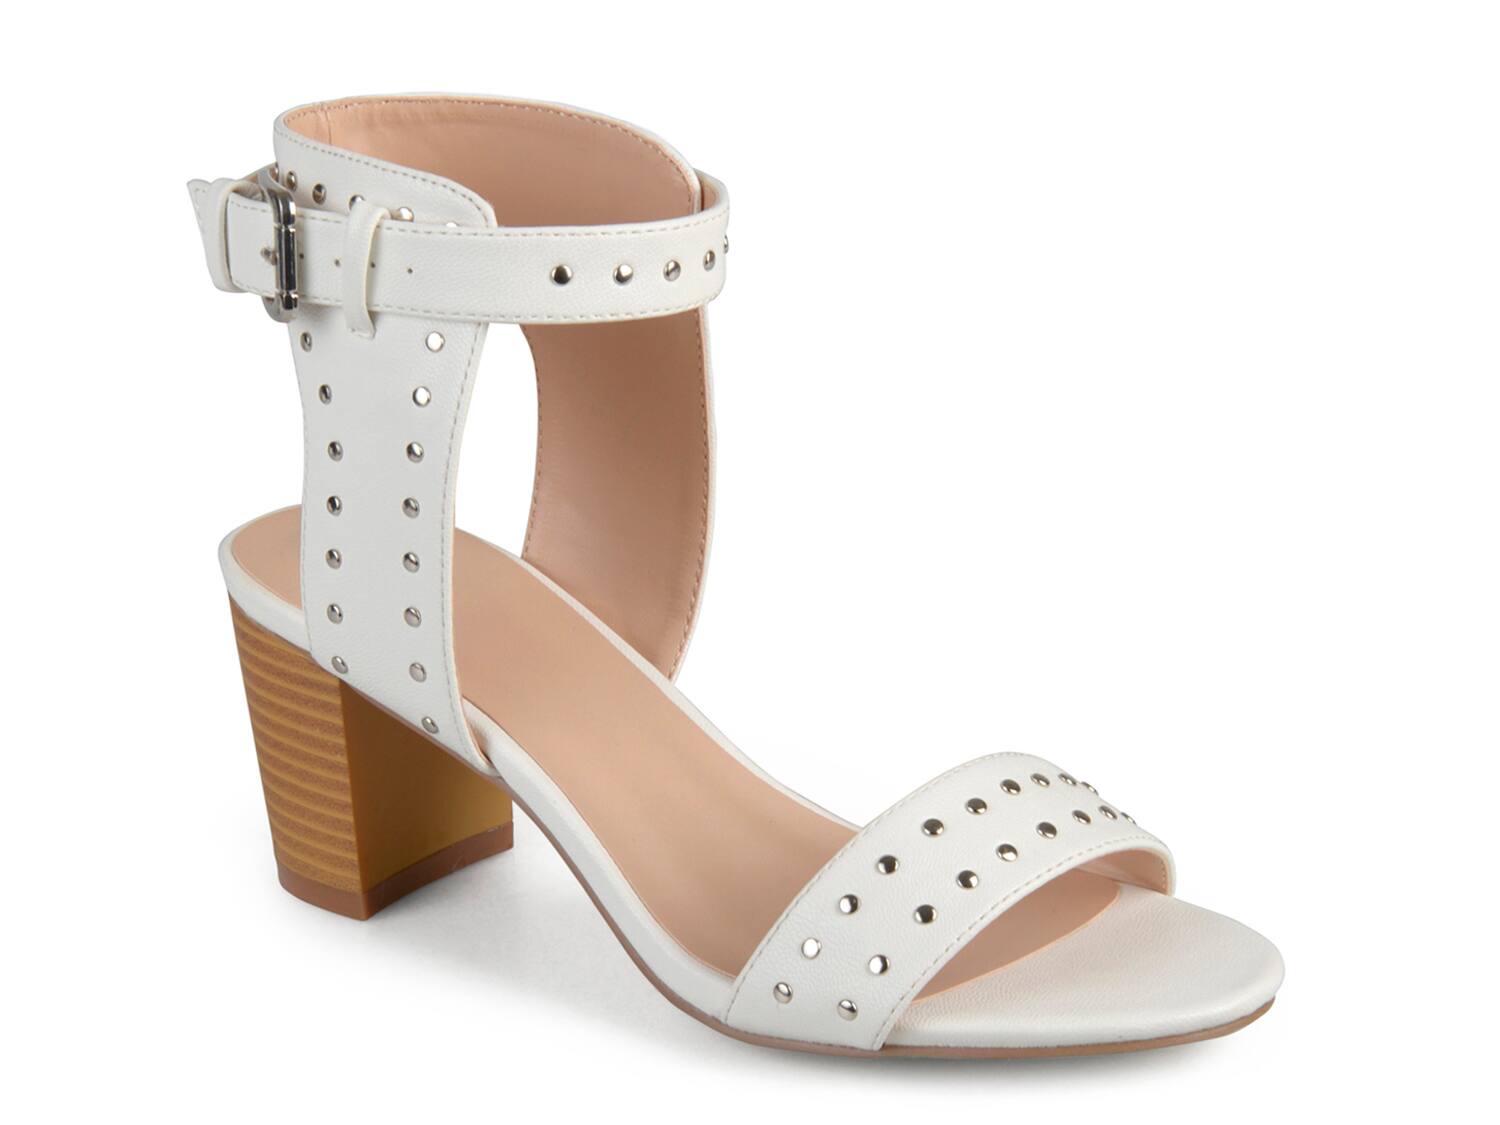 Journee Collection Mabel Sandal - Free Shipping | DSW